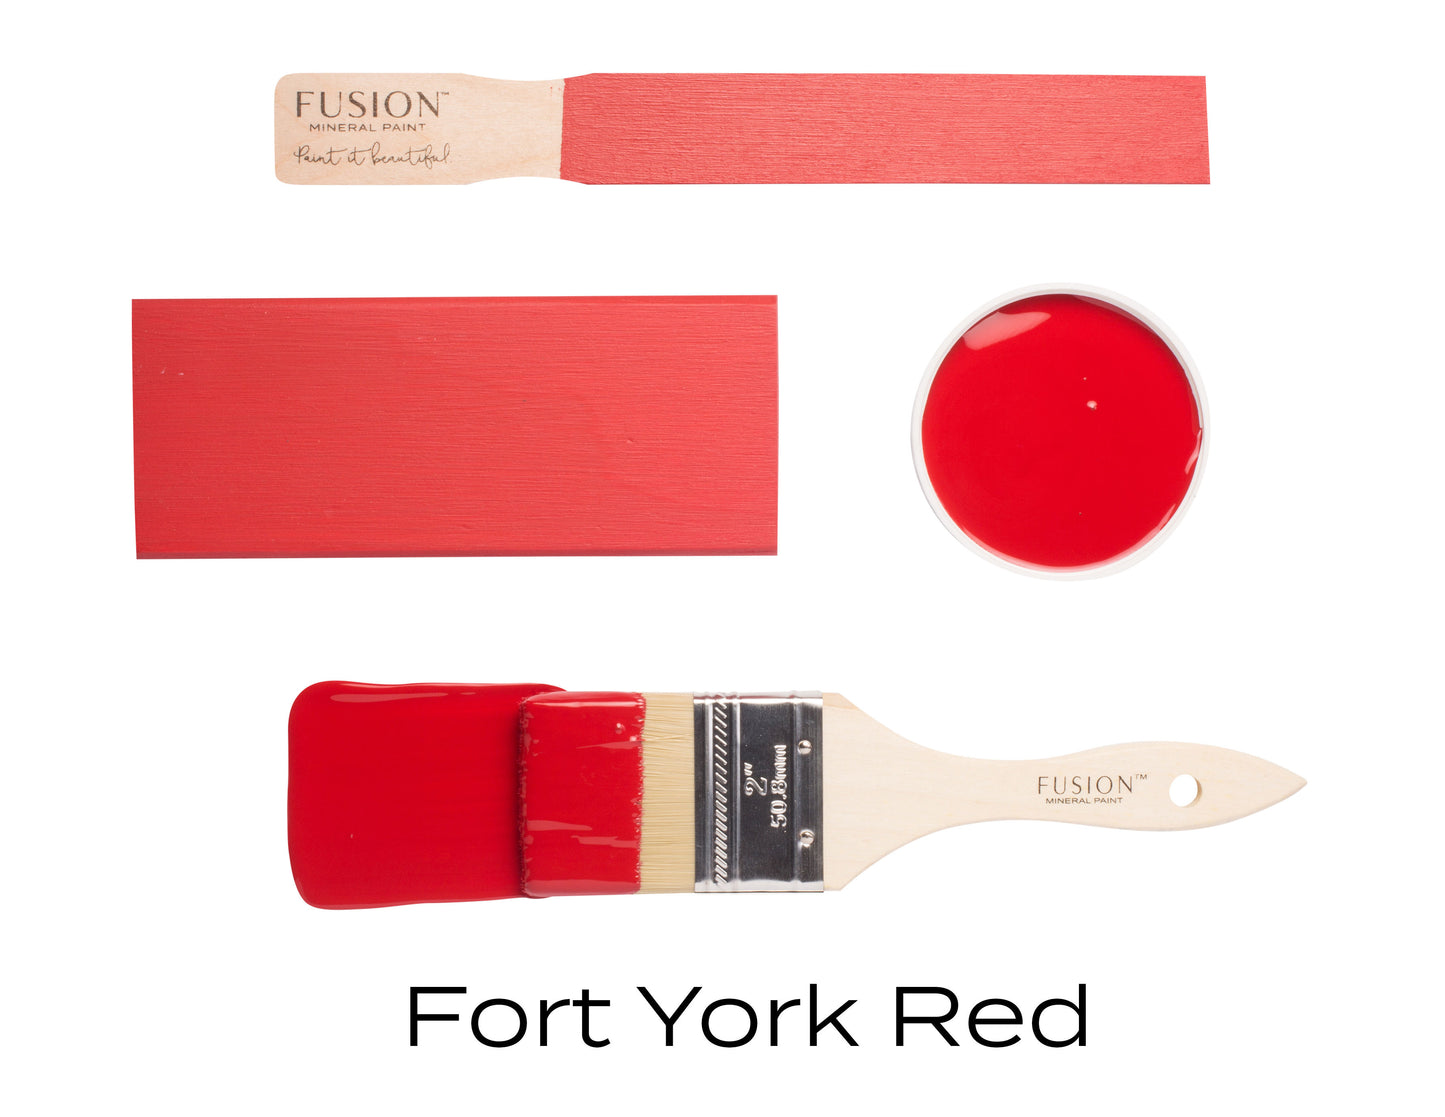 Fort York Red by Fusion